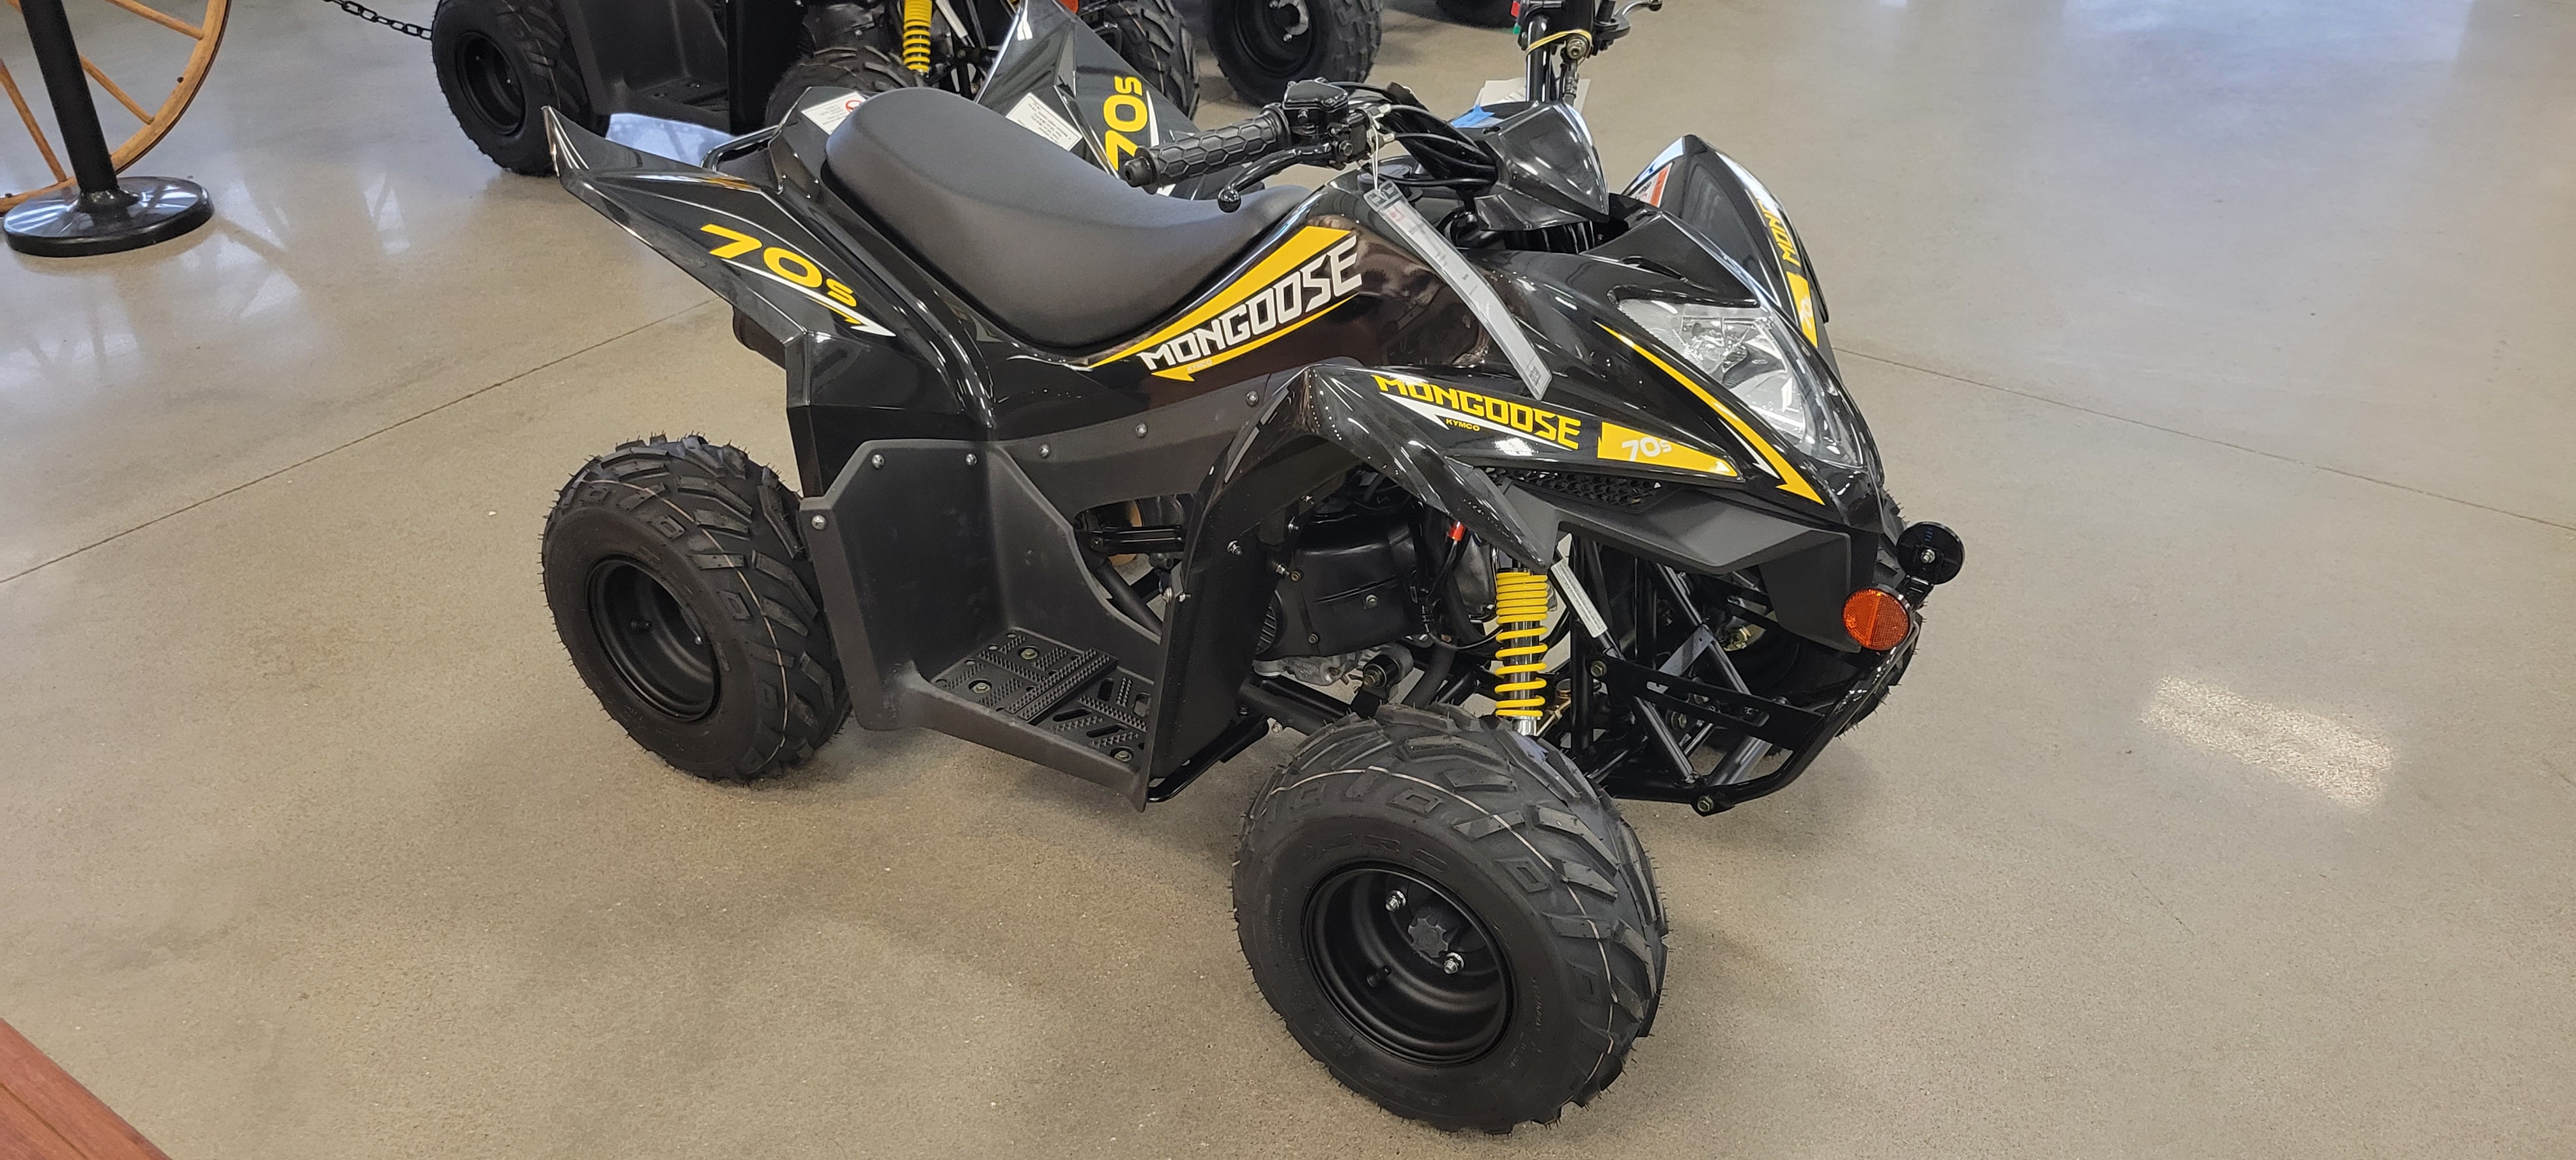 2021 KYMCO Mongoose 70S at Brenny's Motorcycle Clinic, Bettendorf, IA 52722